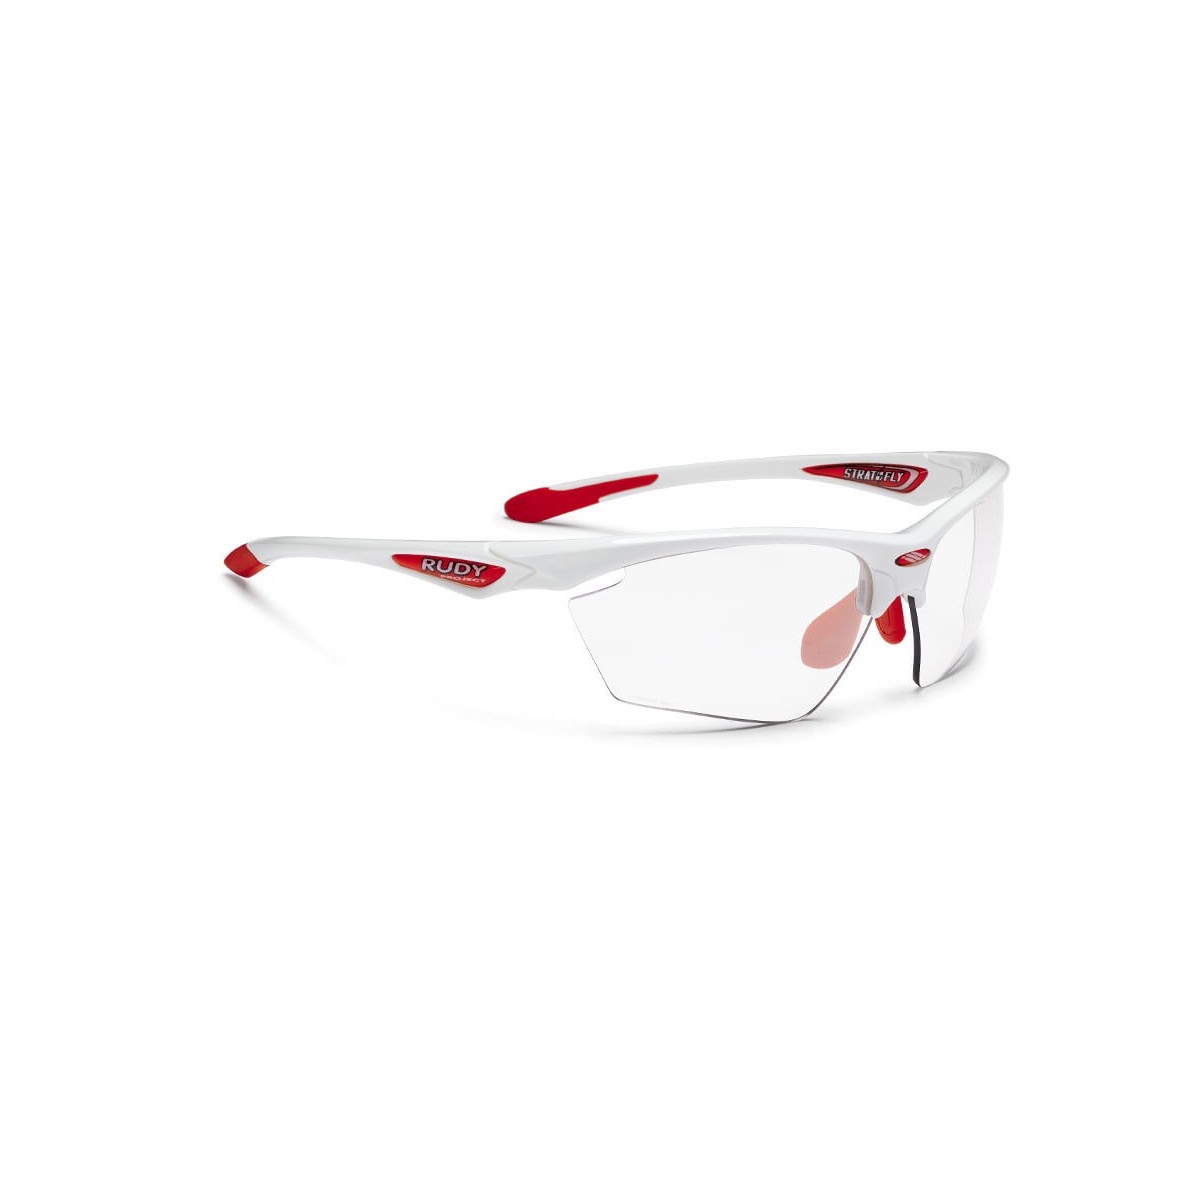 HIT OF günstig Kaufen-Brille Stratofly White Gloss RPO Photoclear Rudy Project. Brille Stratofly White Gloss RPO Photoclear Rudy Project . 